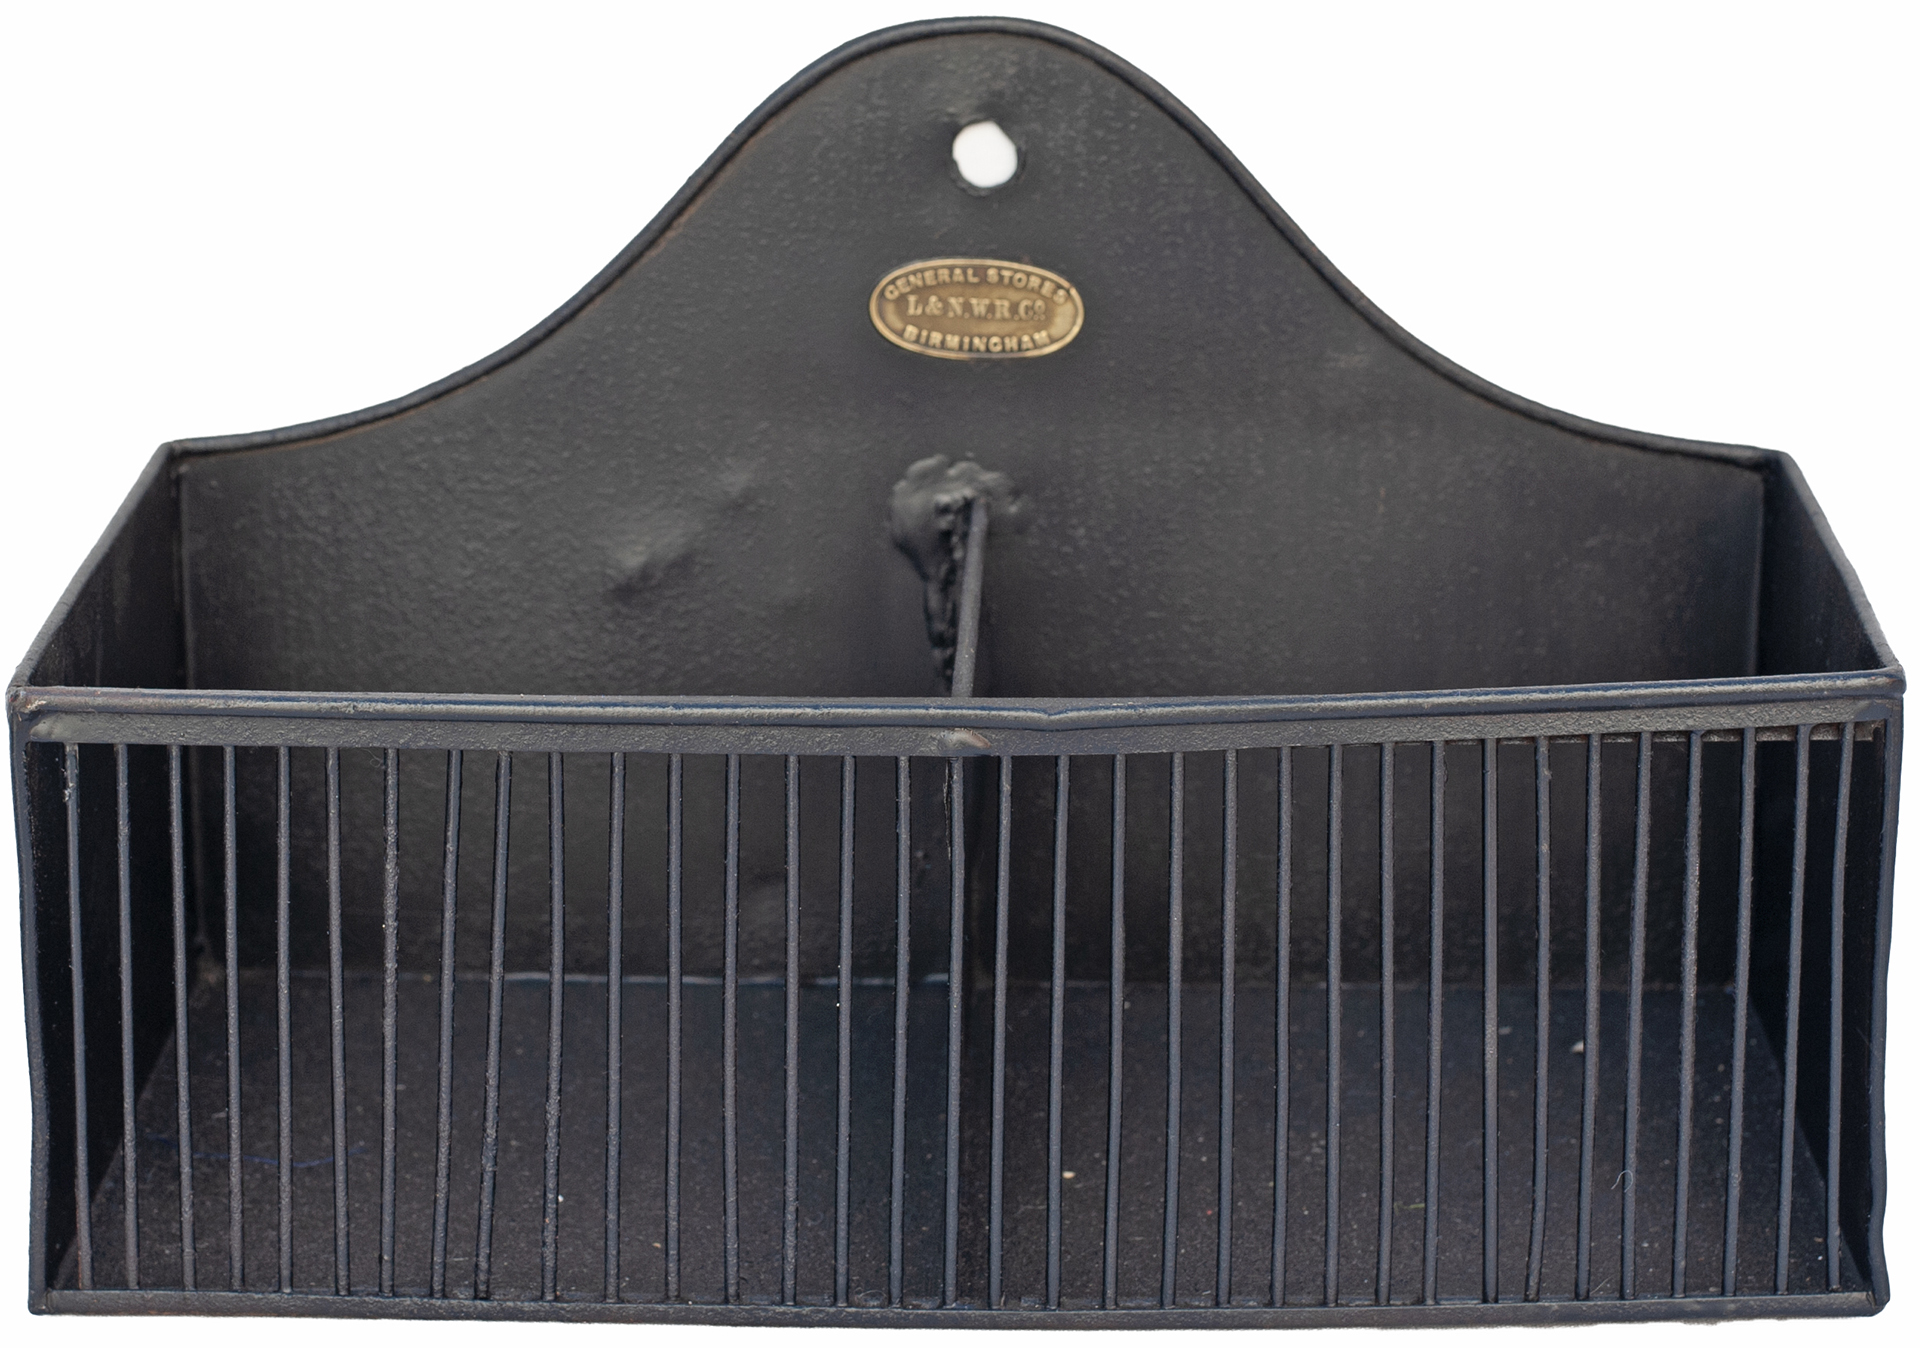 London & North Western Railway tinplate letter rack, brass plated GENERAL STORES L&NWR Co